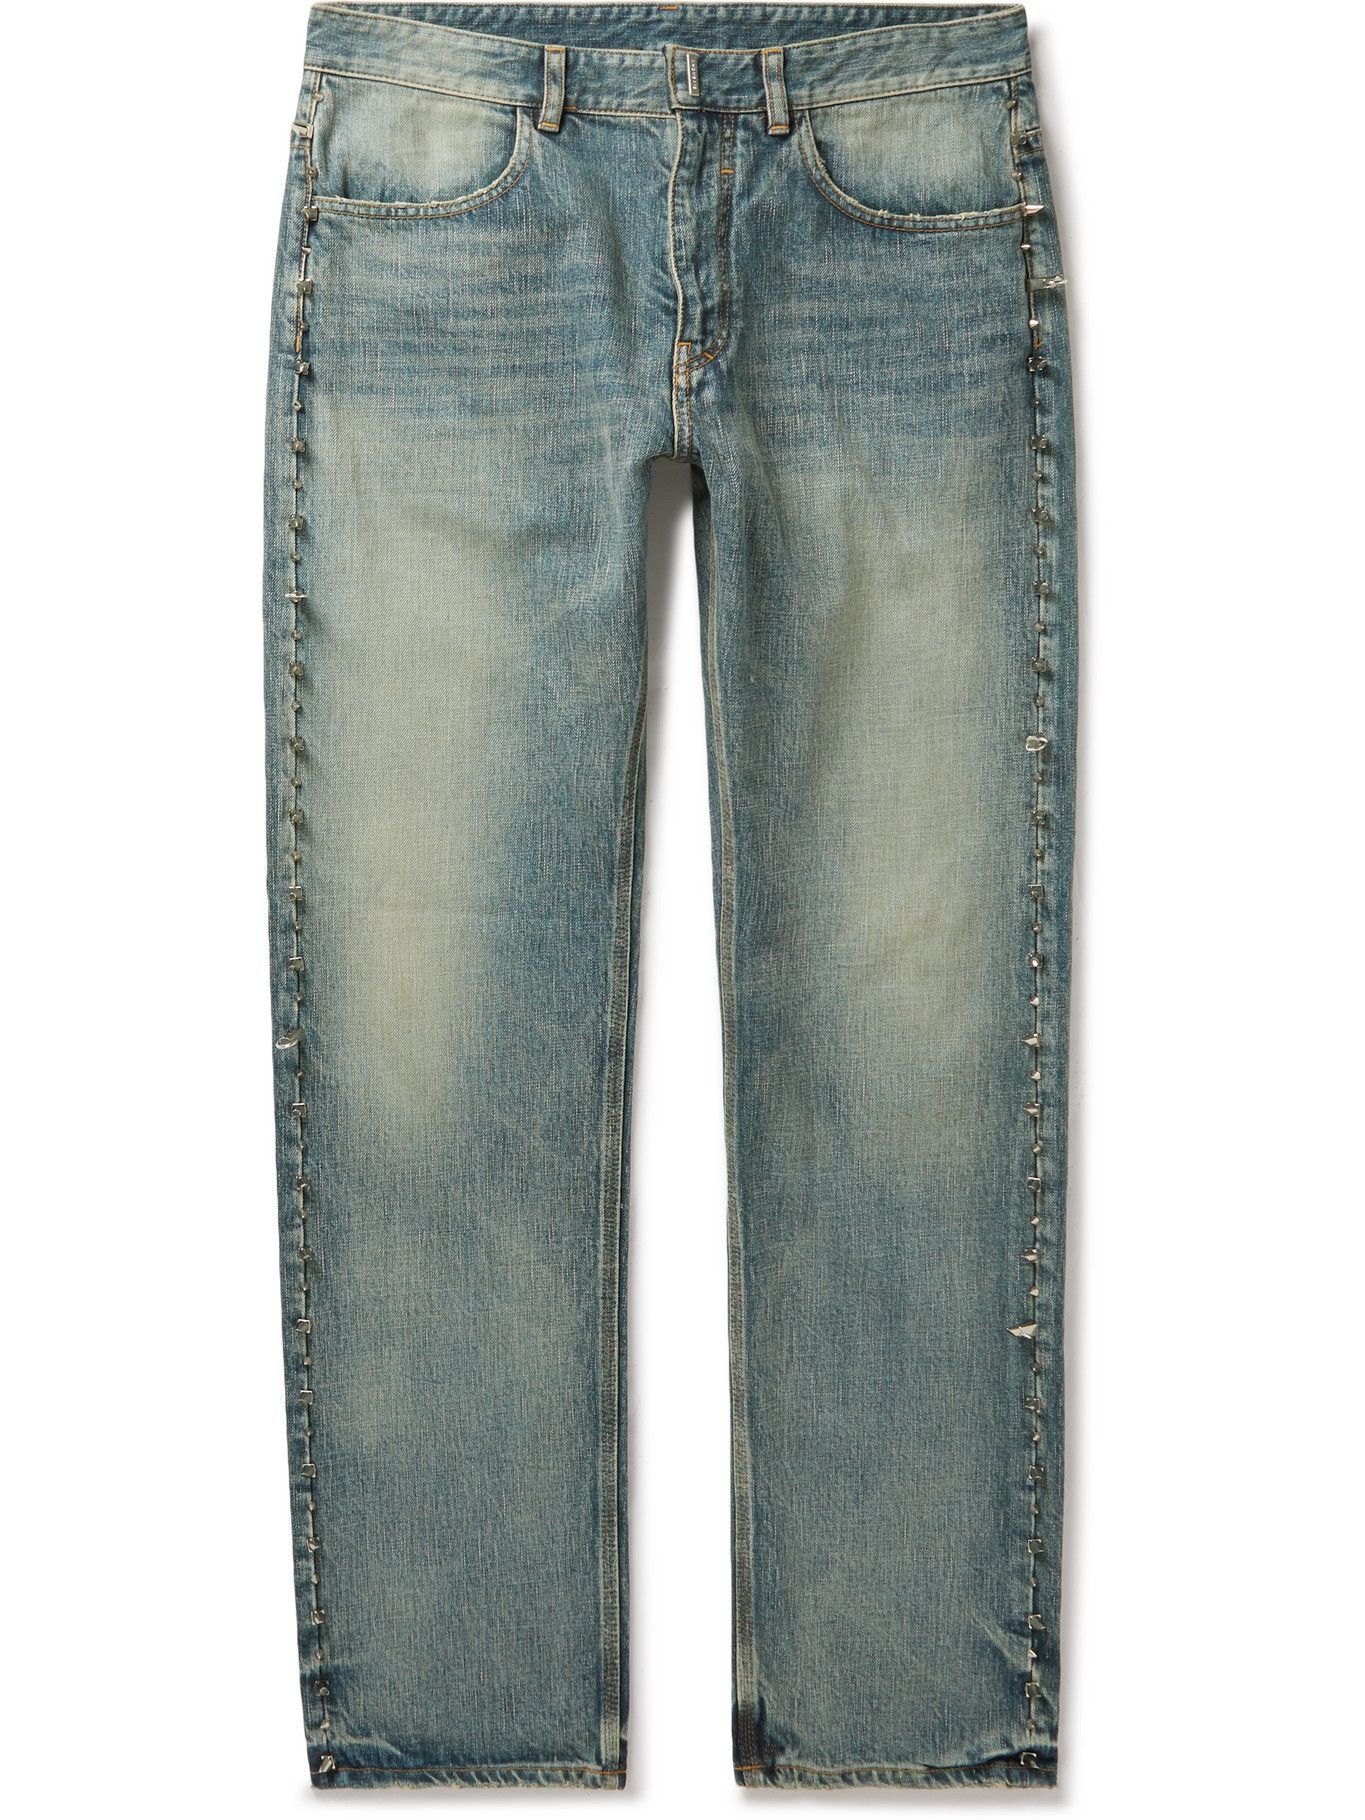 Givenchy - Studded Jeans - Blue Givenchy